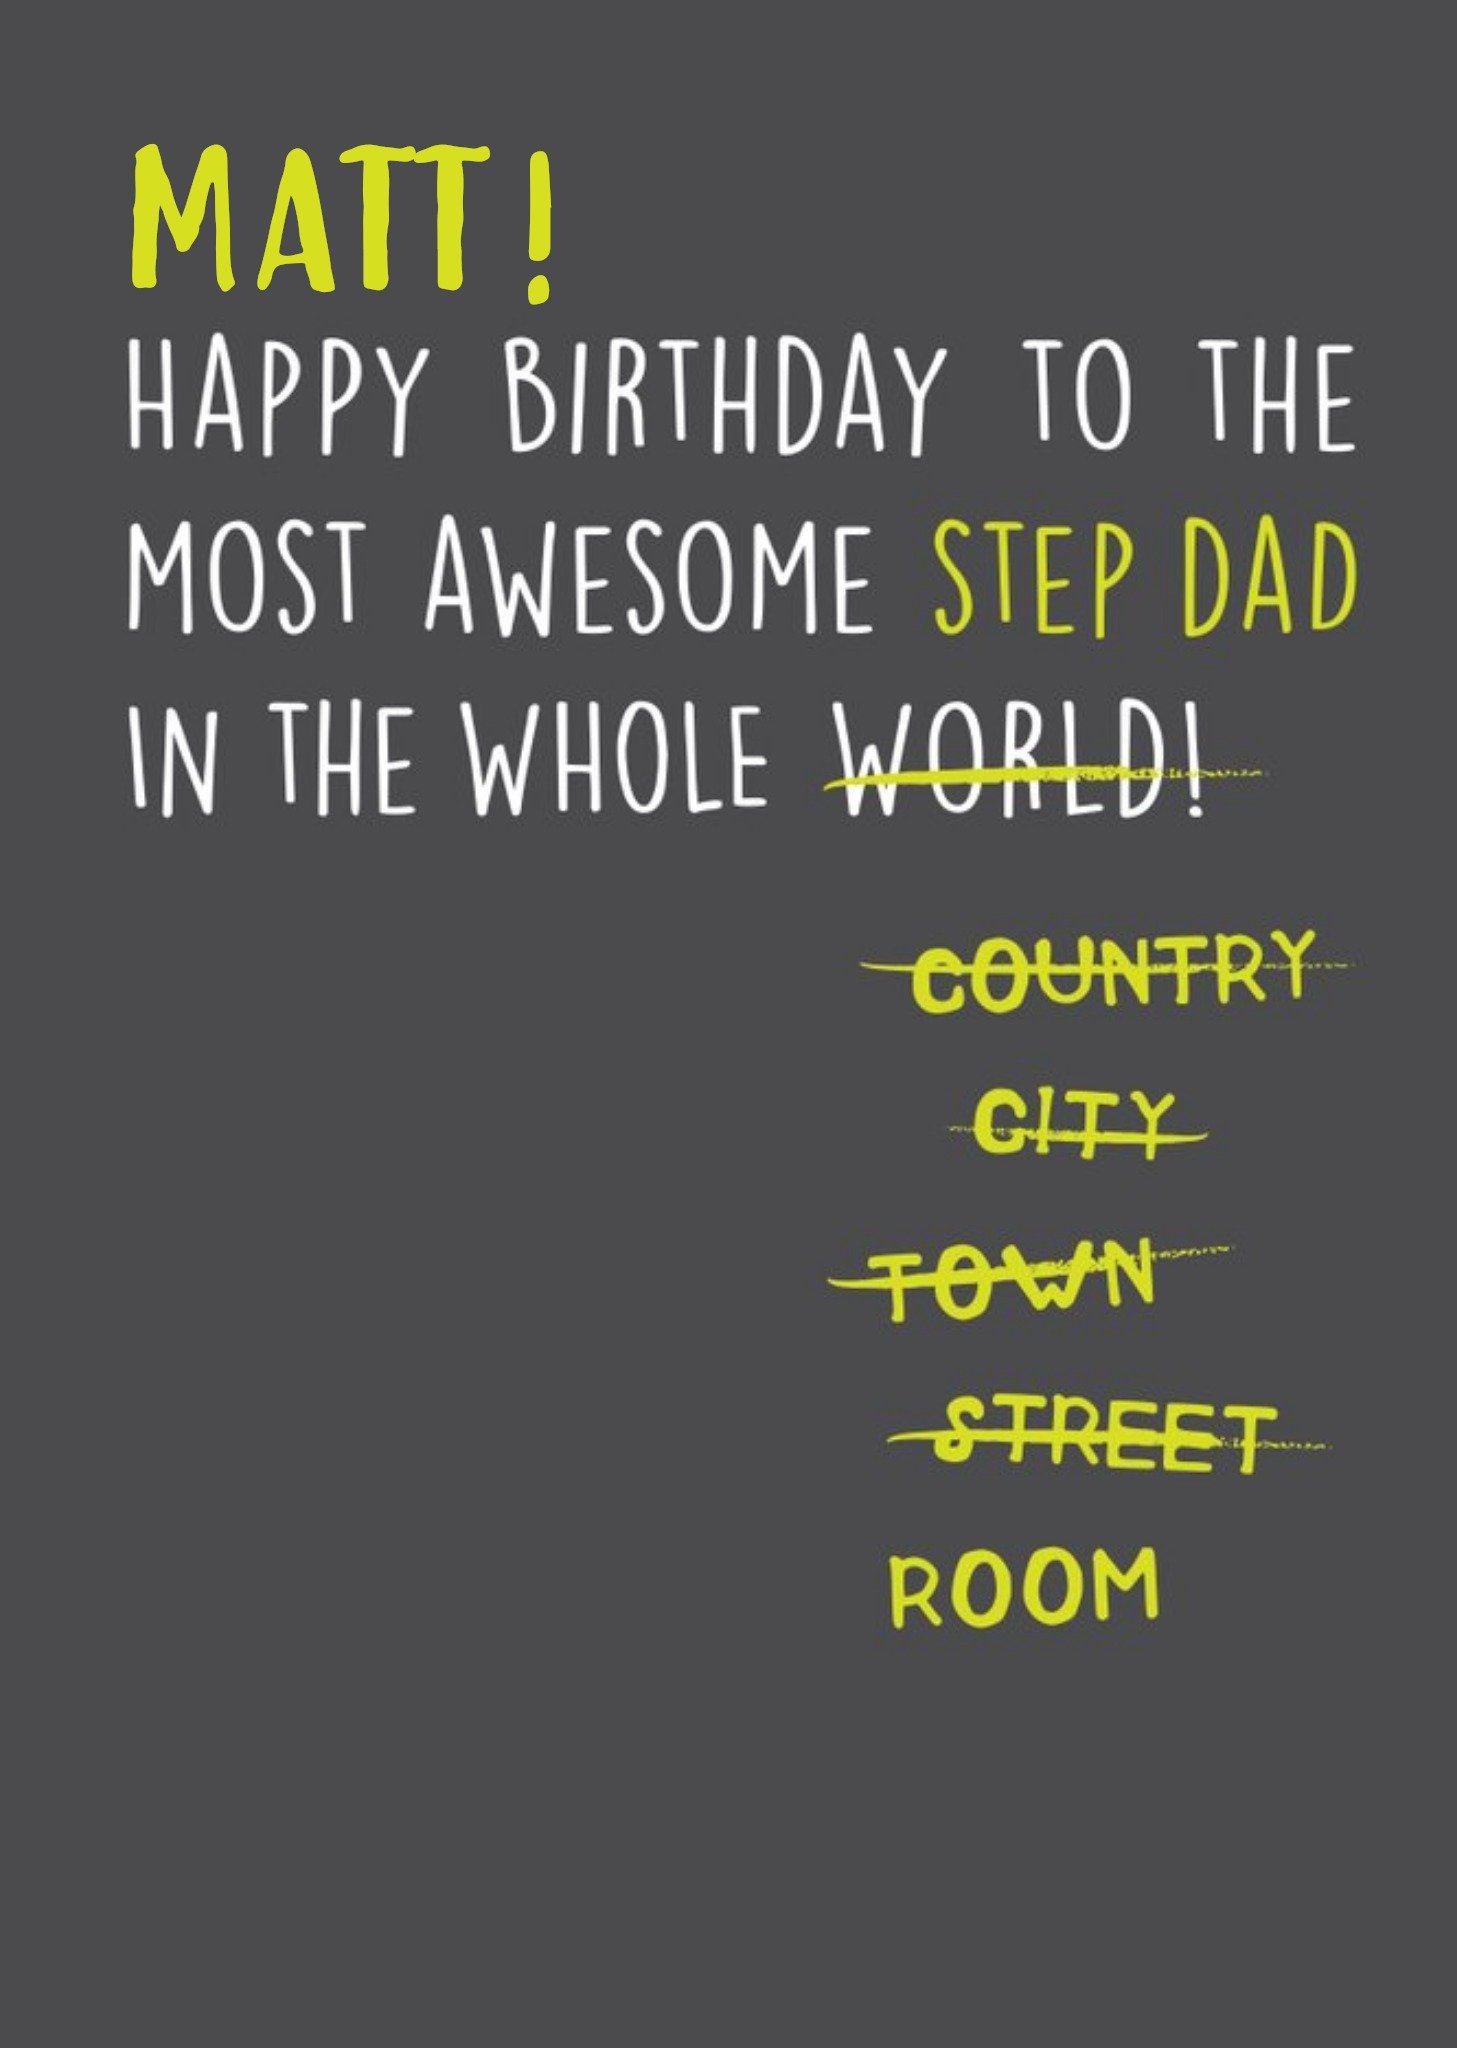 Moonpig Funny Birthday Card - The Most Awesome Stepdad Ecard